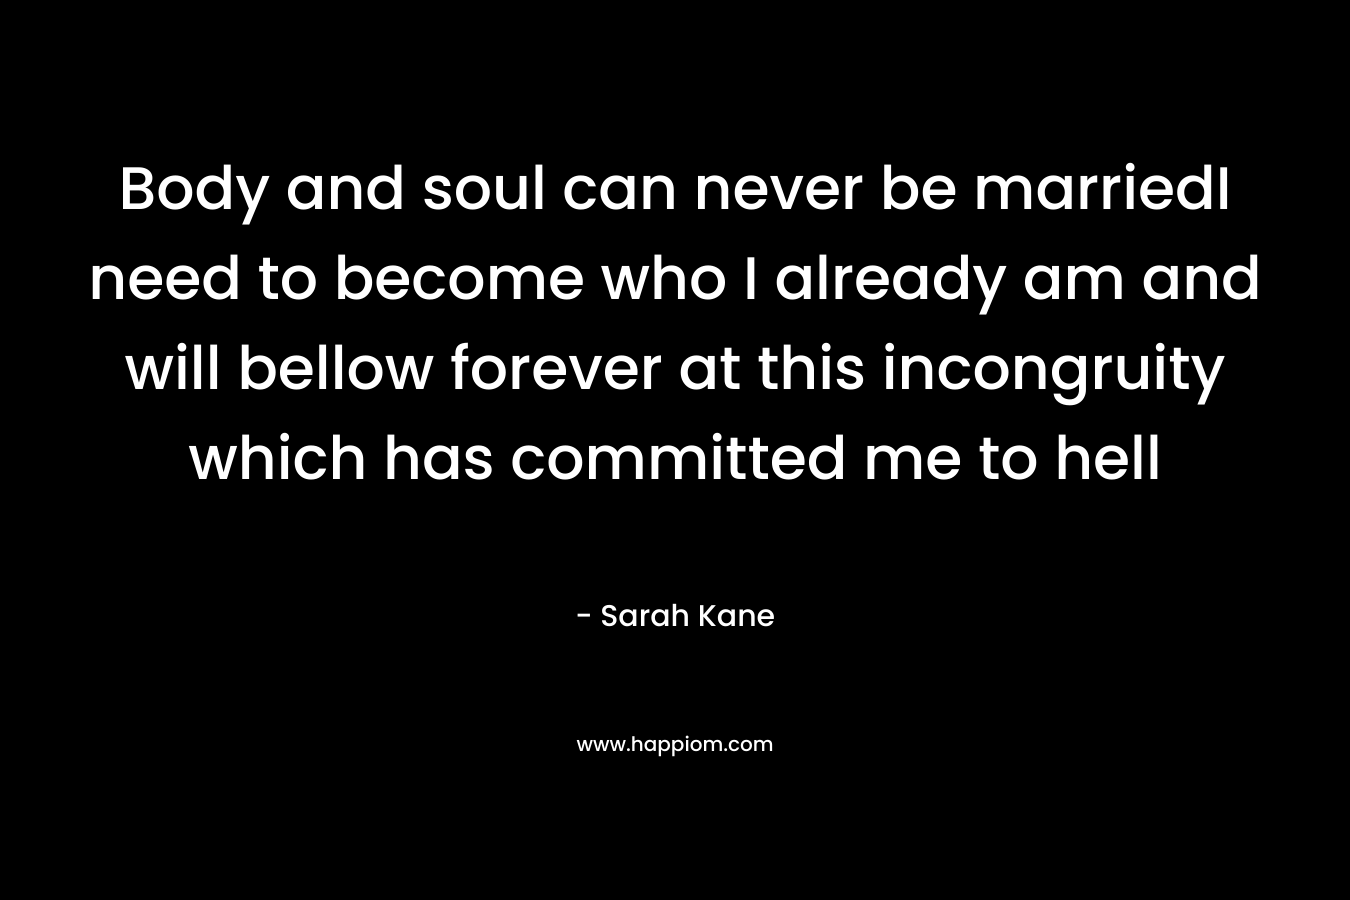 Body and soul can never be marriedI need to become who I already am and will bellow forever at this incongruity which has committed me to hell – Sarah Kane